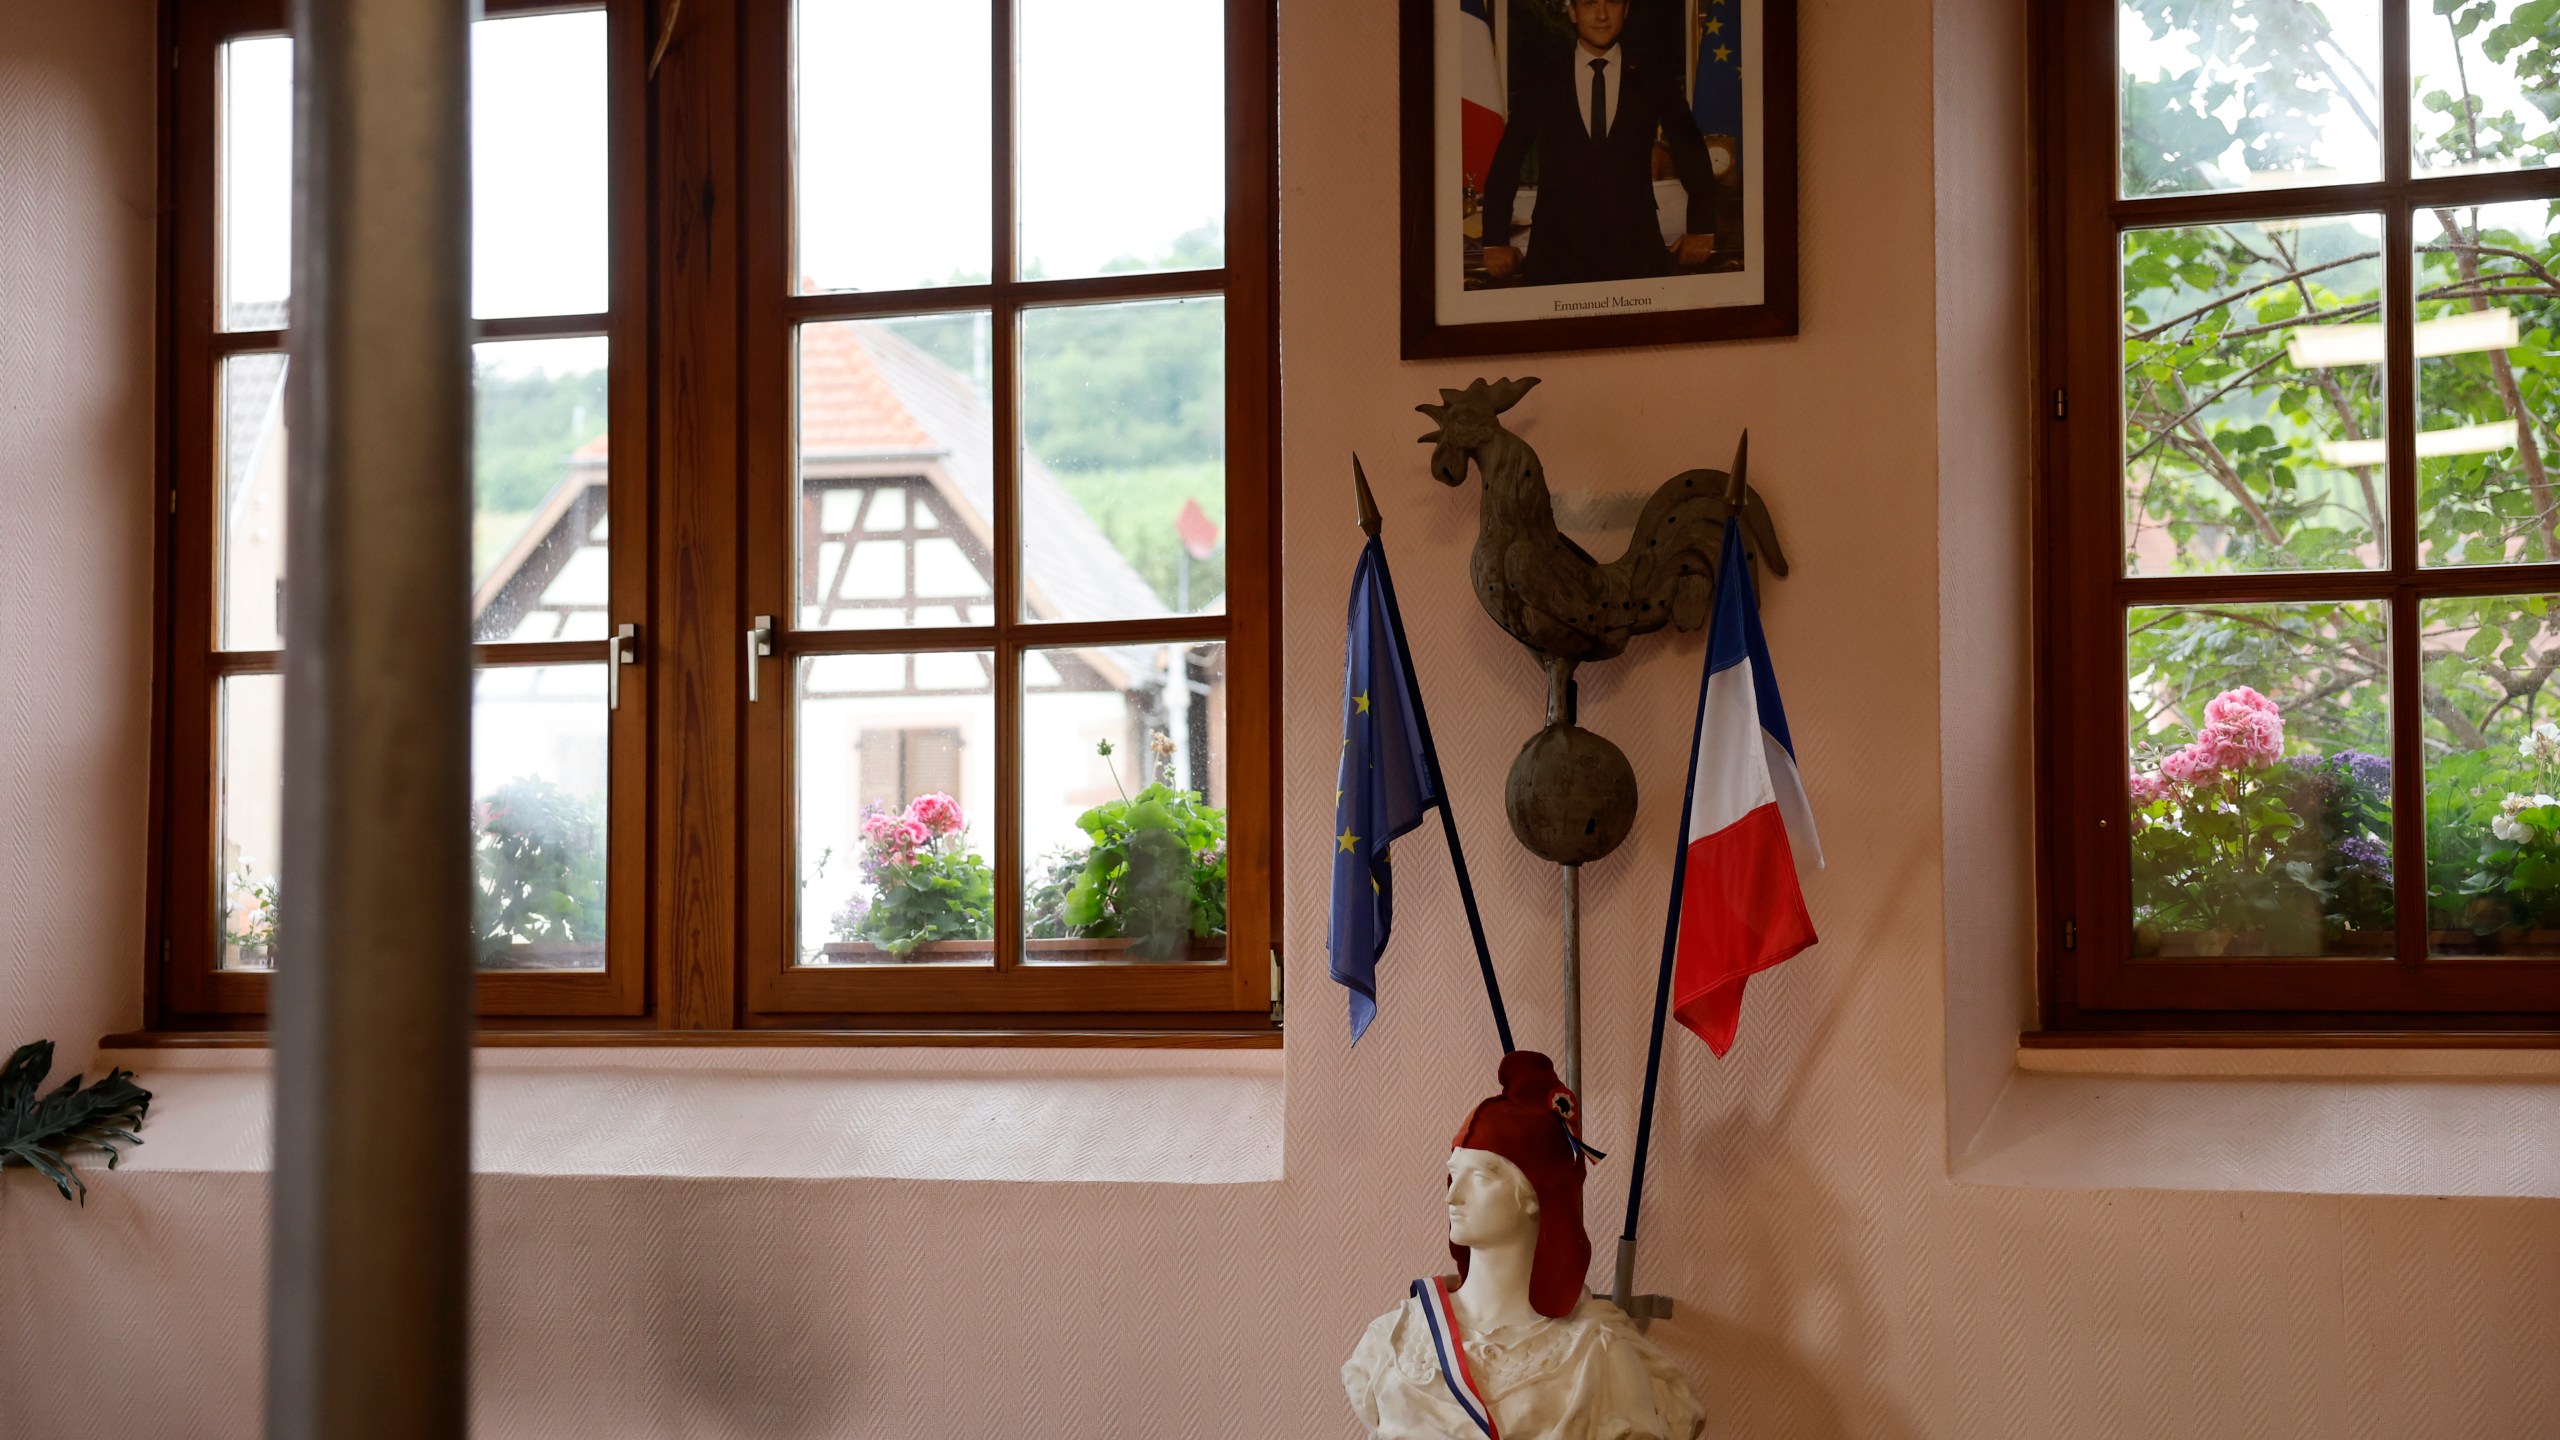 A portrait of French President Emmanuel Macron hangs above a statue of Marianne and a rooster, symbols of the French Republic and France, in a voting station in Soultz-Les-Bains, eastern France, Sunday, June 30, 2024. France is holding the first round of an early parliamentary election on Sunday that could bring the country's first far-right government since Nazi occupation during World War II. The second round is on July 7, and the outcome of the vote remains highly uncertain. (AP Photo/Jean-Francois Badias)